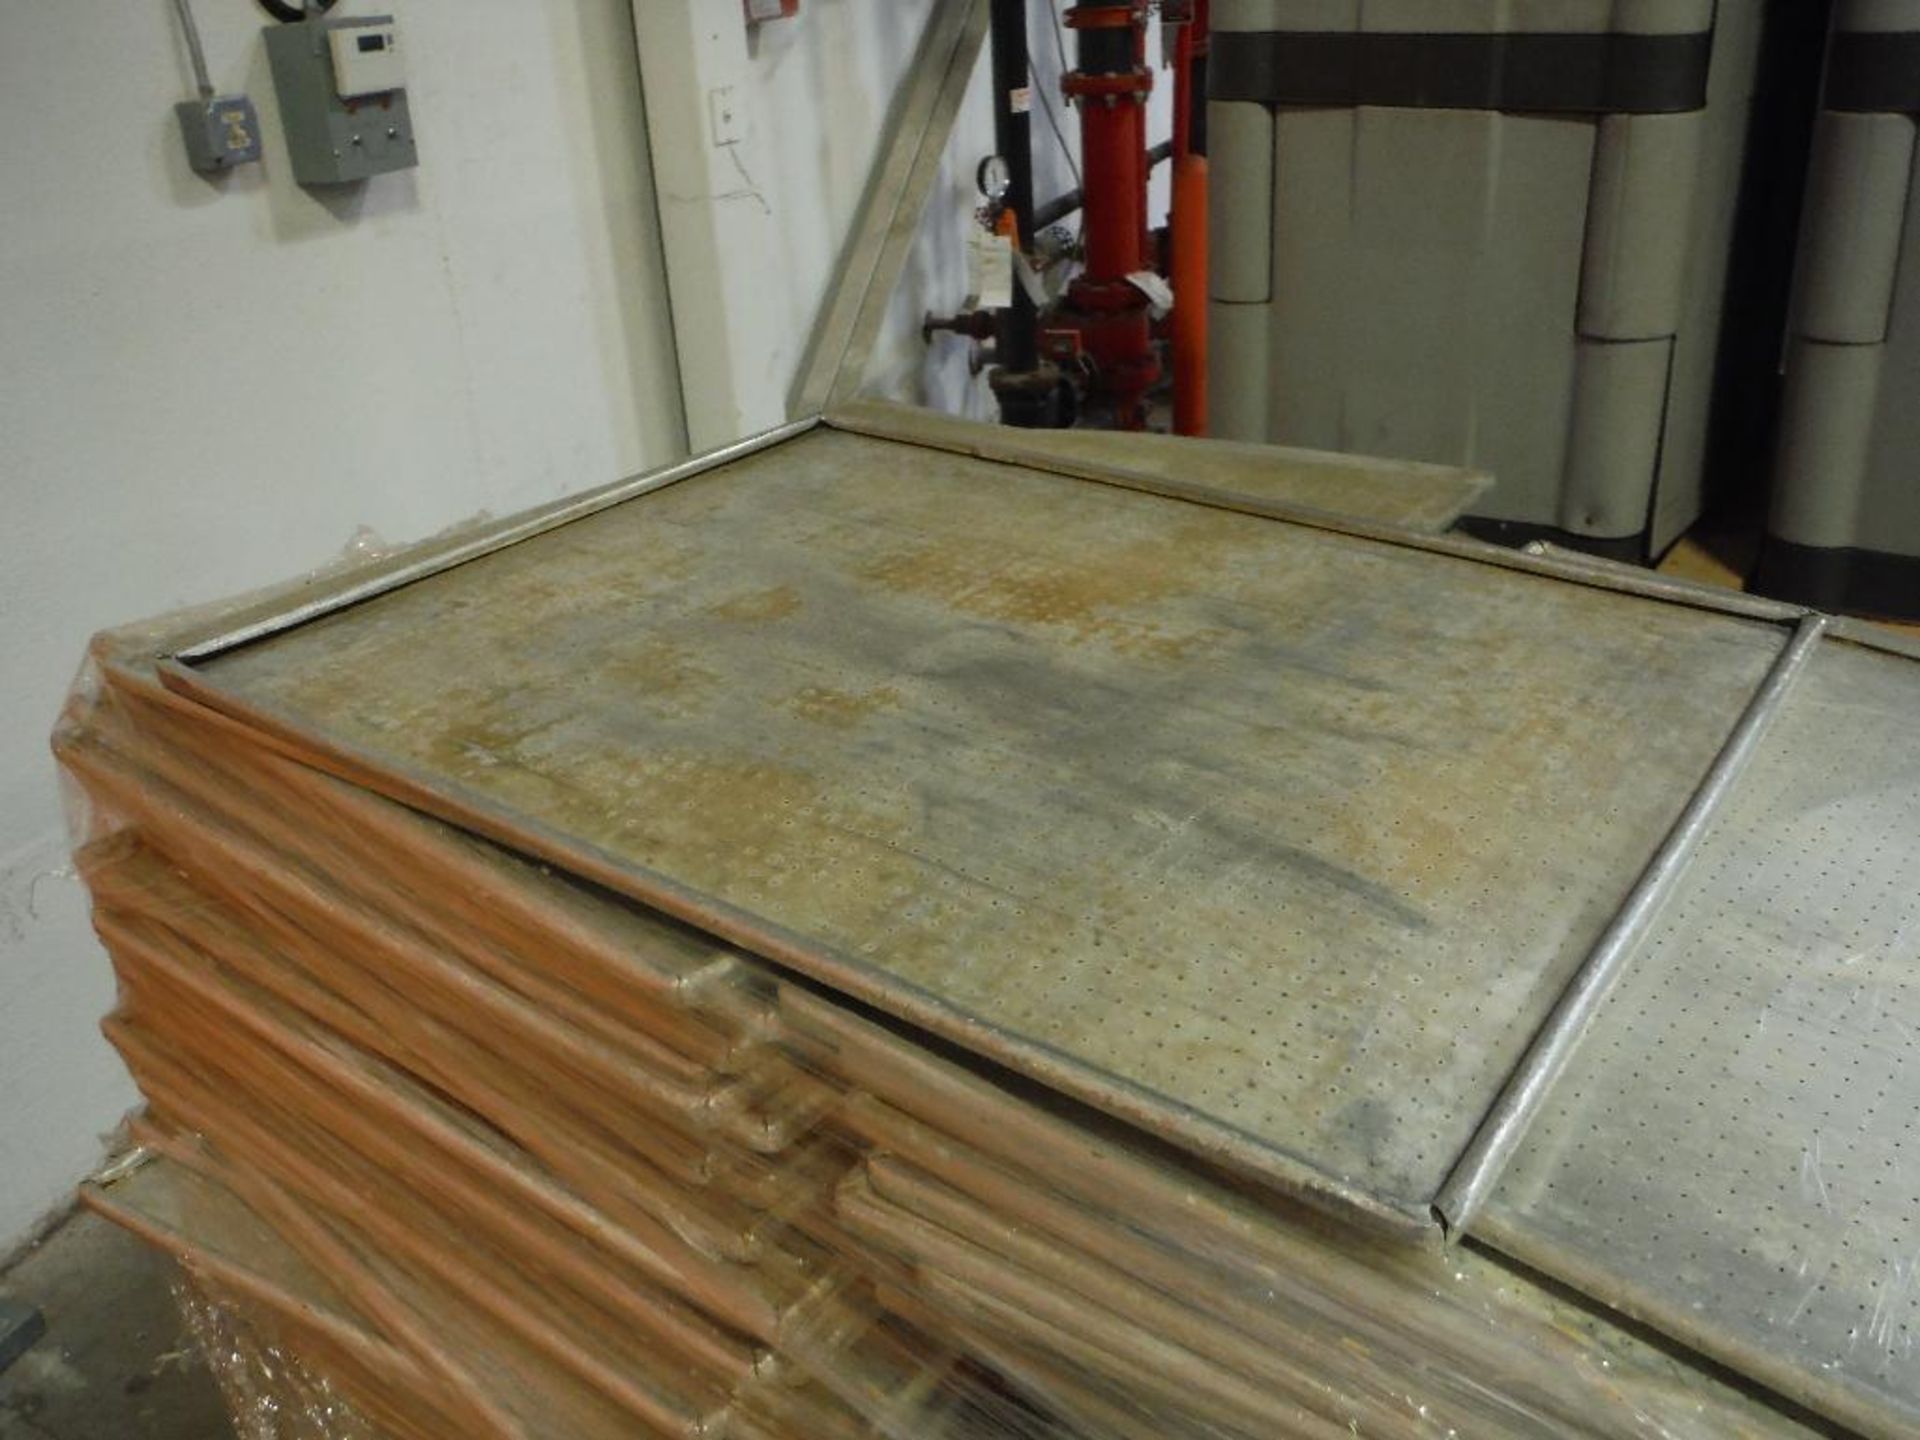 Aluminum perforated sheet pan, 26 in. x 20 in., approximately 185 **Rigging FEE: $15 ** - Image 2 of 2